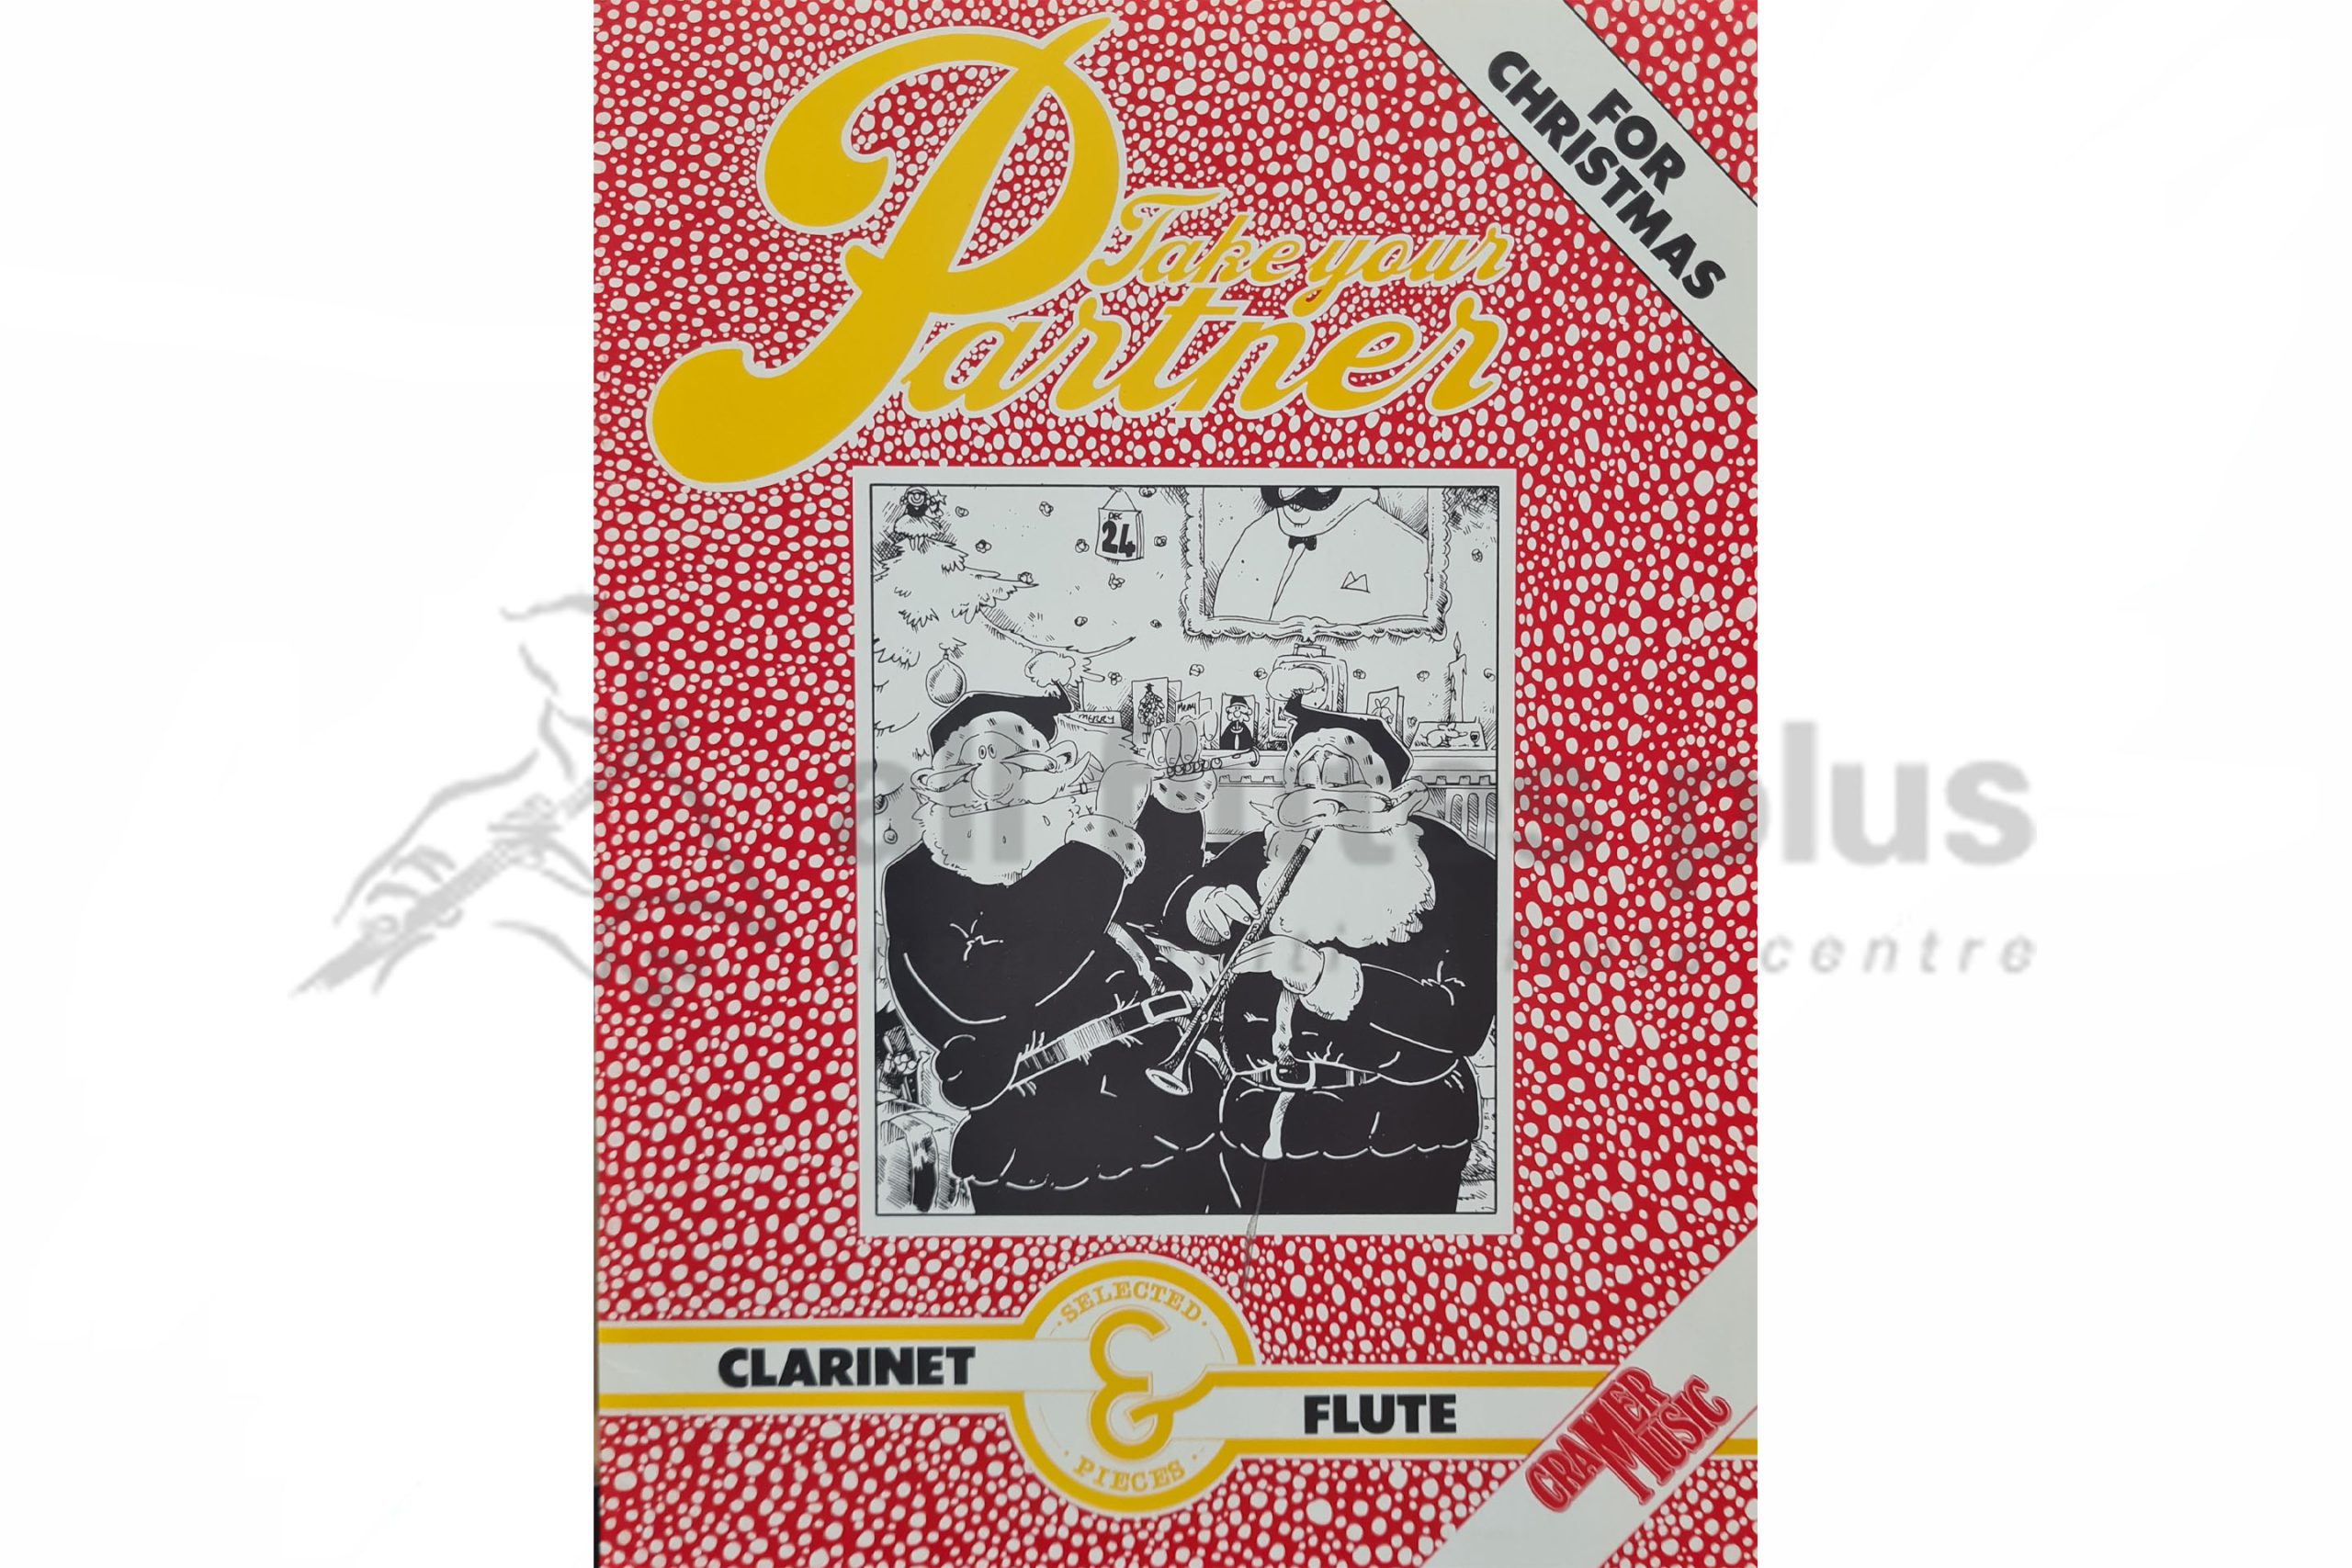 Take Your Partner for Christmas-Clarinet and Flute